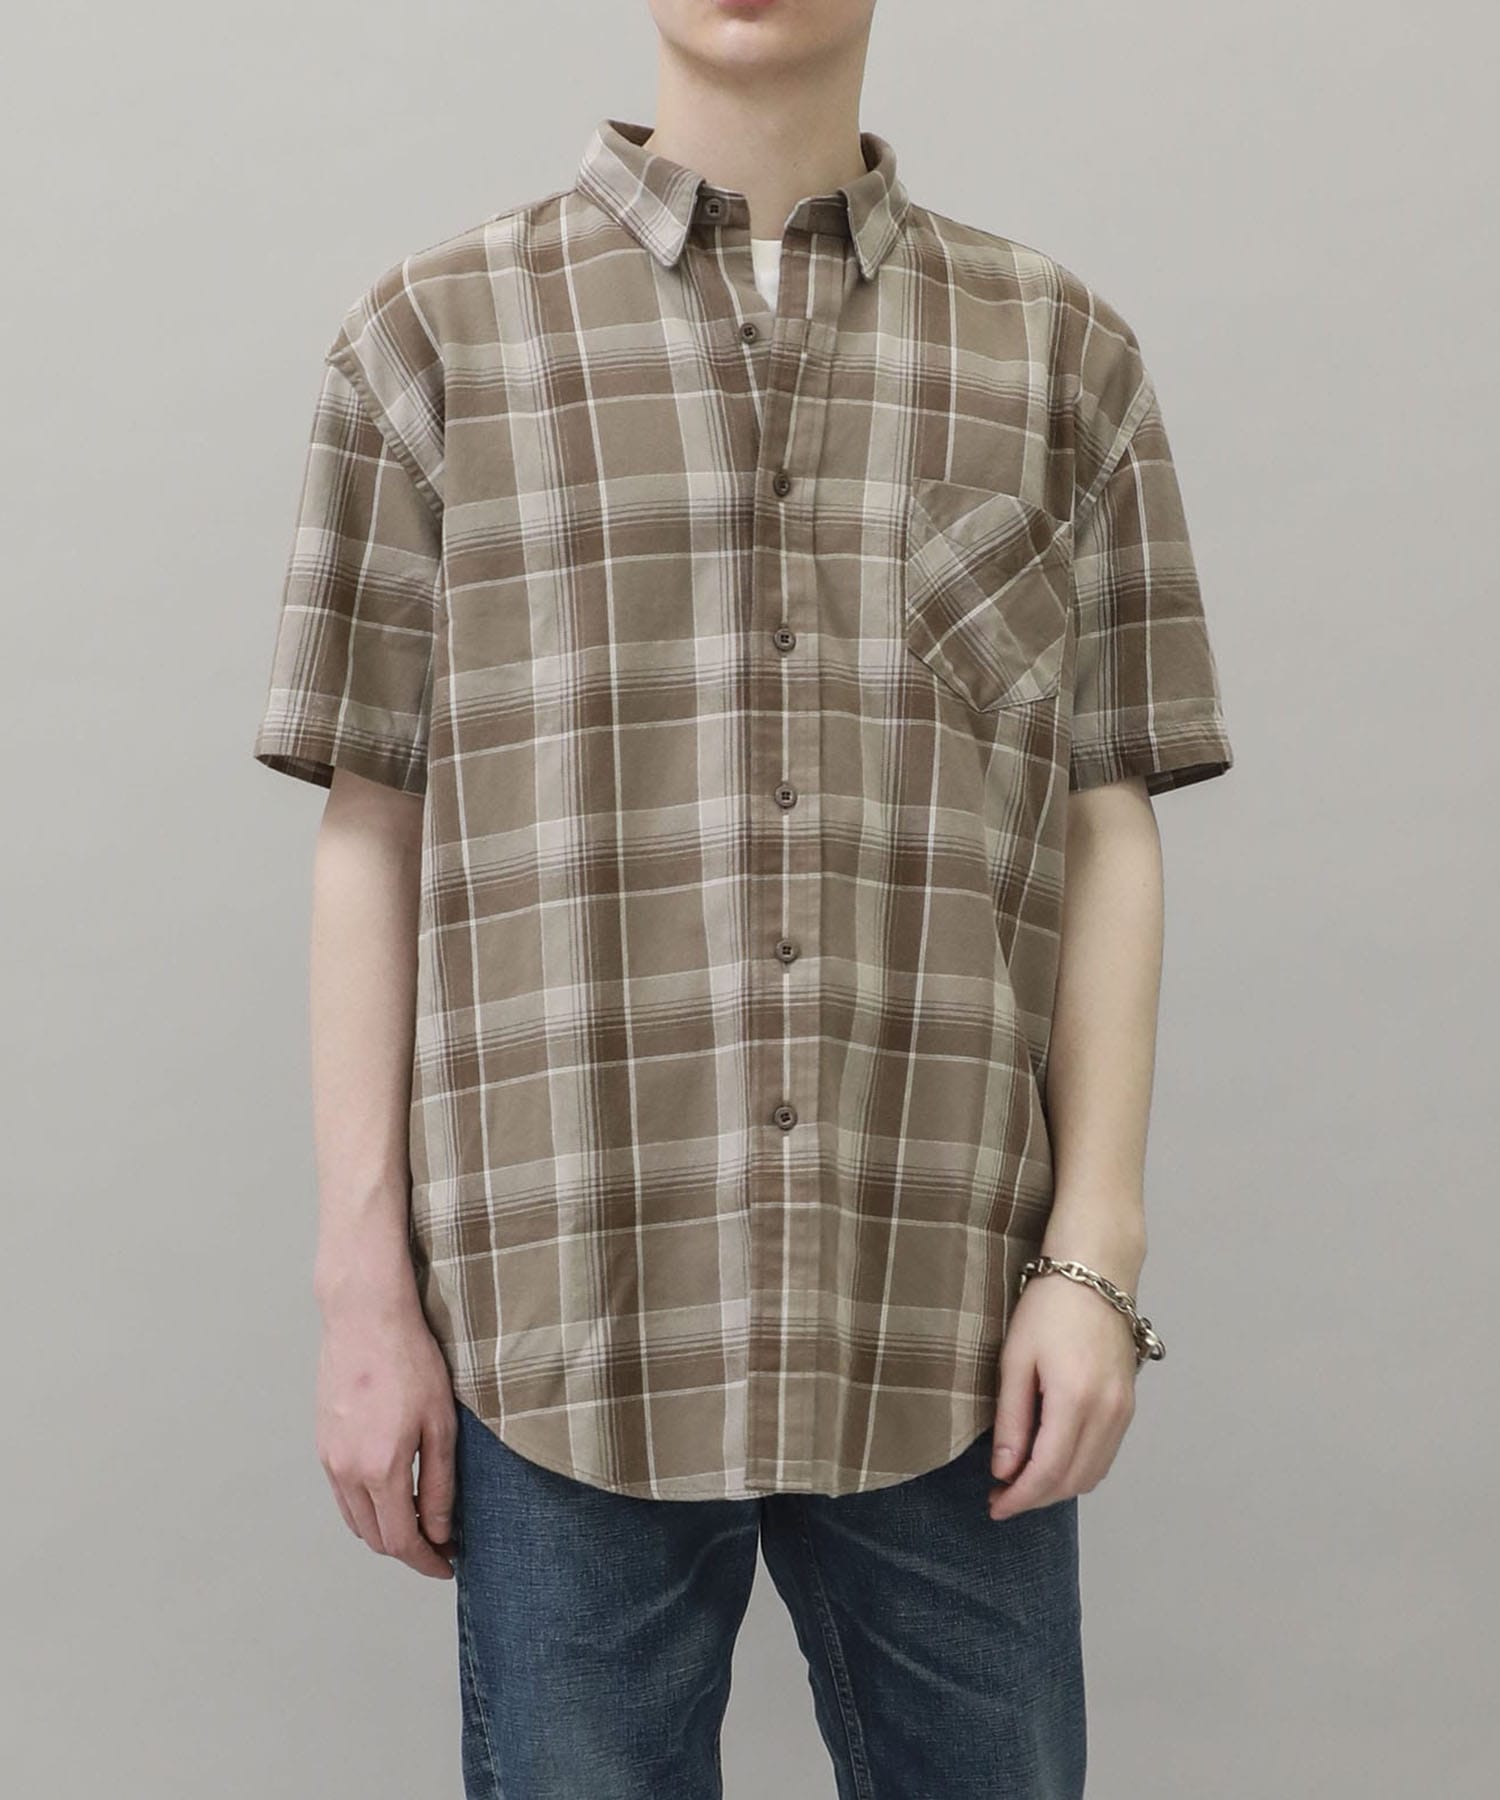 DWELLER B.D. S/S SHIRT RELAXED FIT COTTON TWILL PLAID